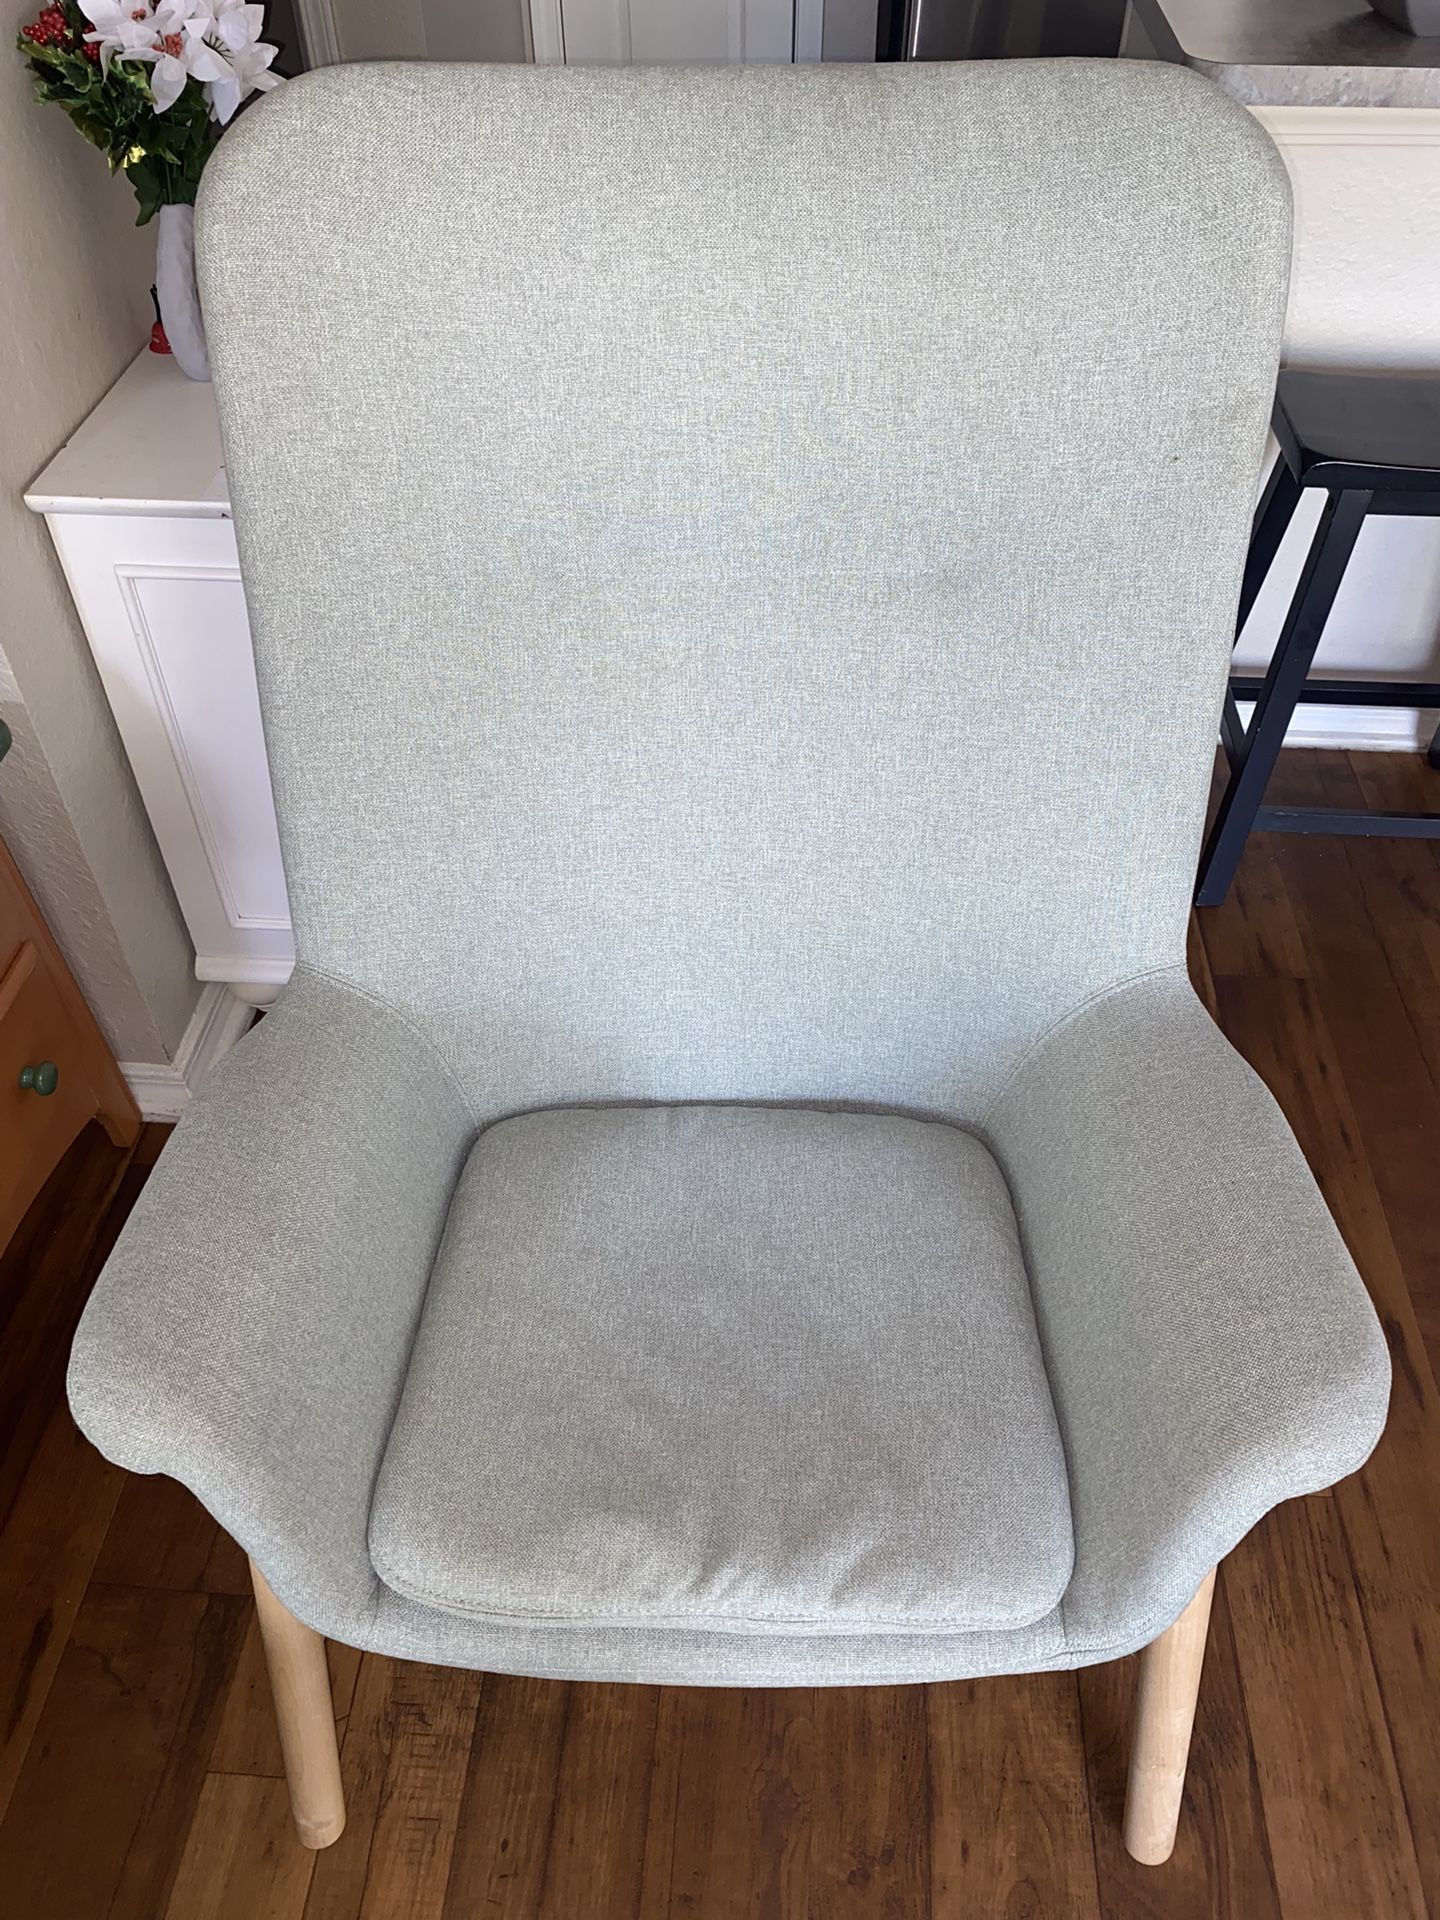 Oversized Gray Accent Chair